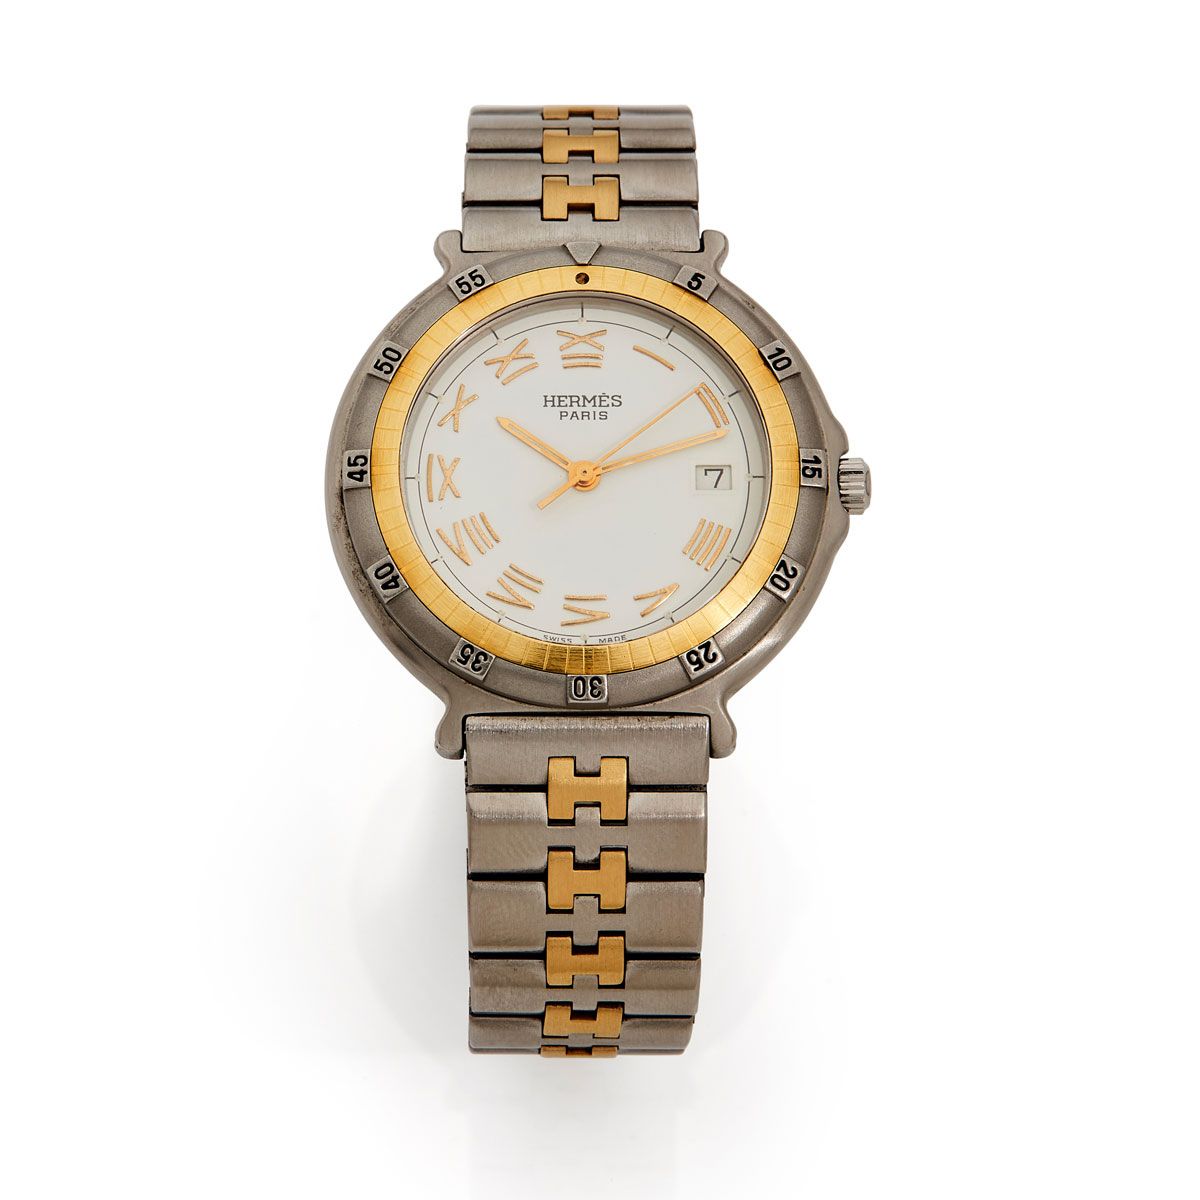 Null Hermès No. 251339, circa 2000


A steel and gold-plated steel ladies' watch&hellip;